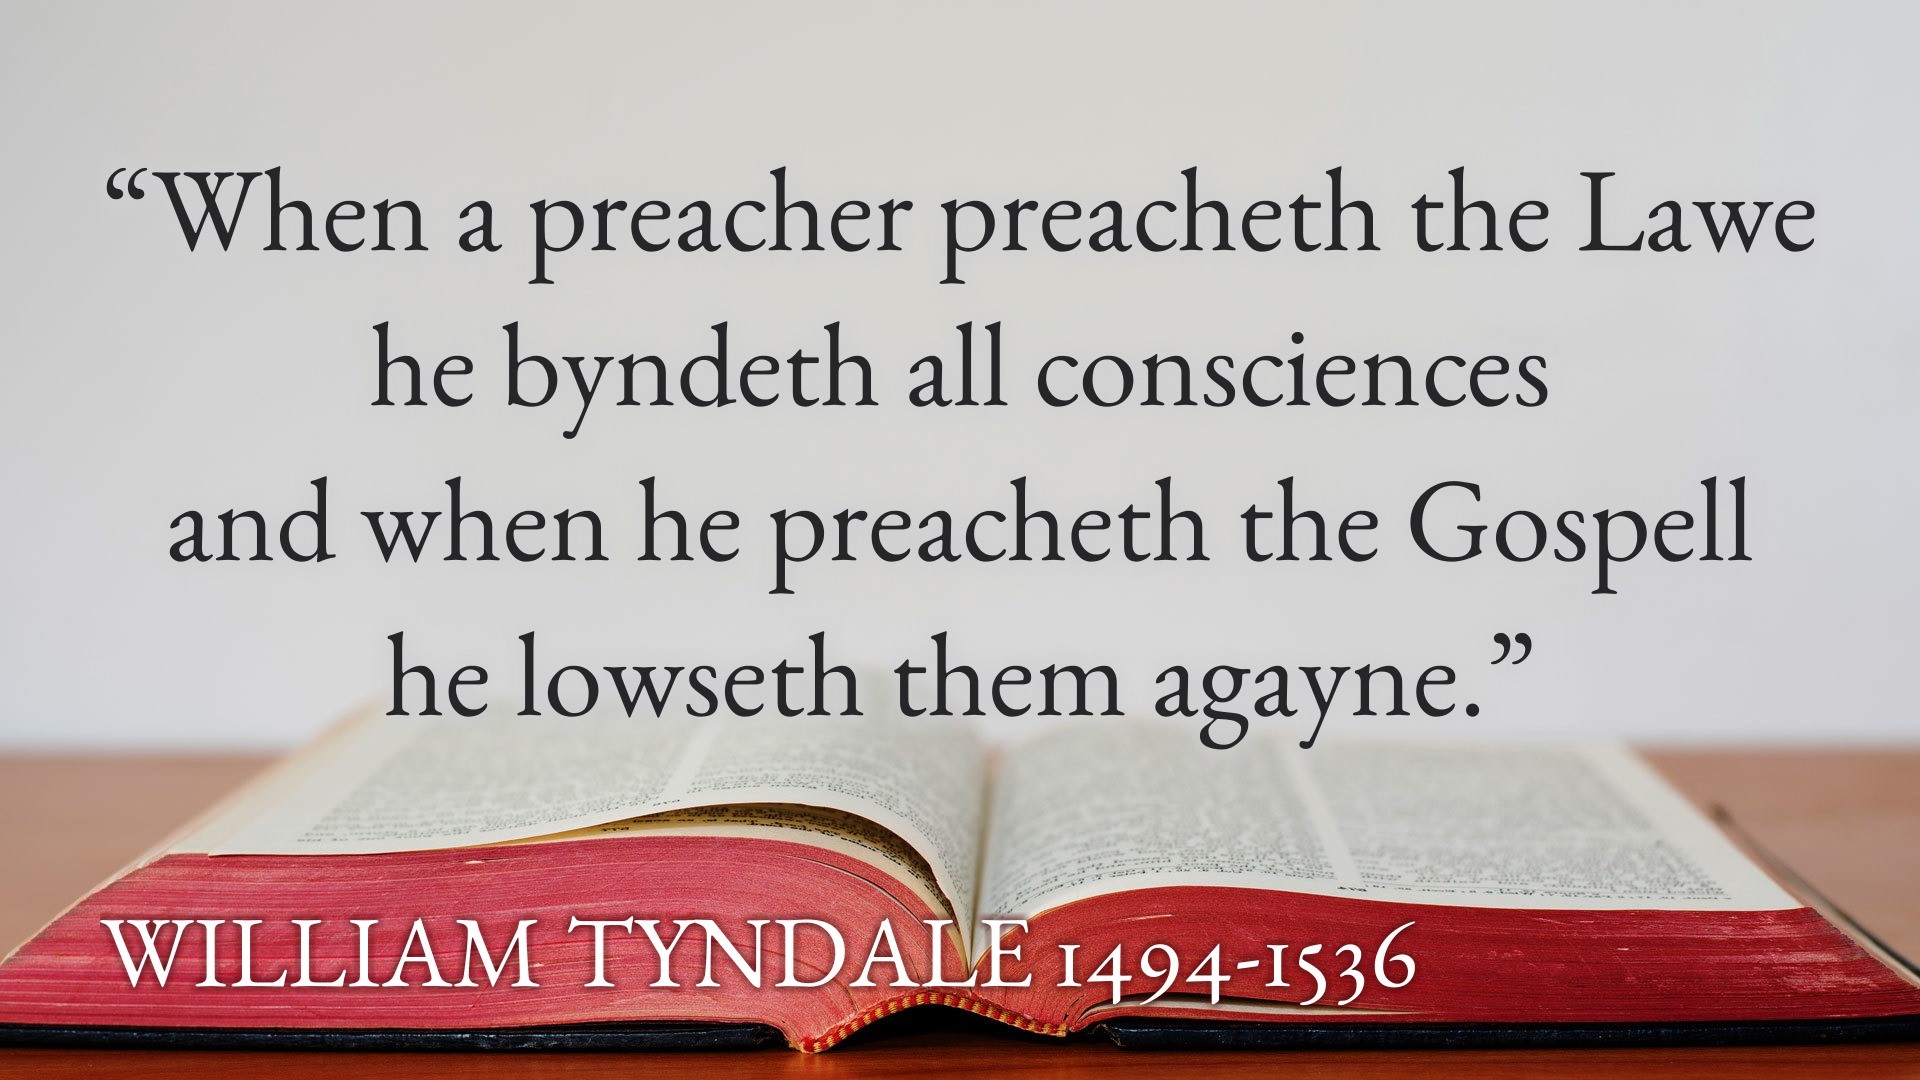 Tyndale on Law